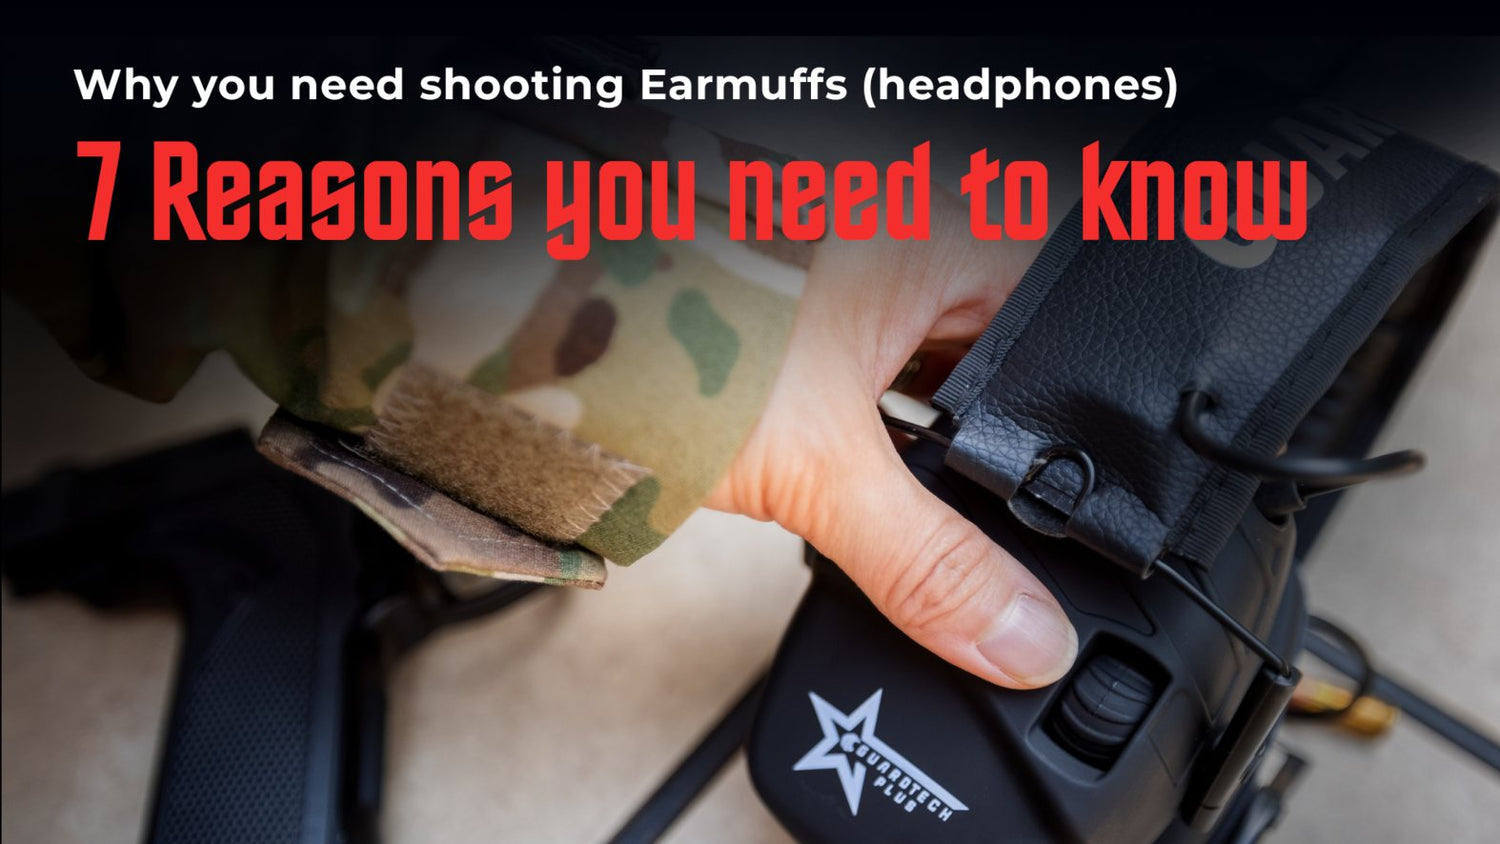 Why you need shooting Earmuffs (headphones): 7 Reasons you need to know